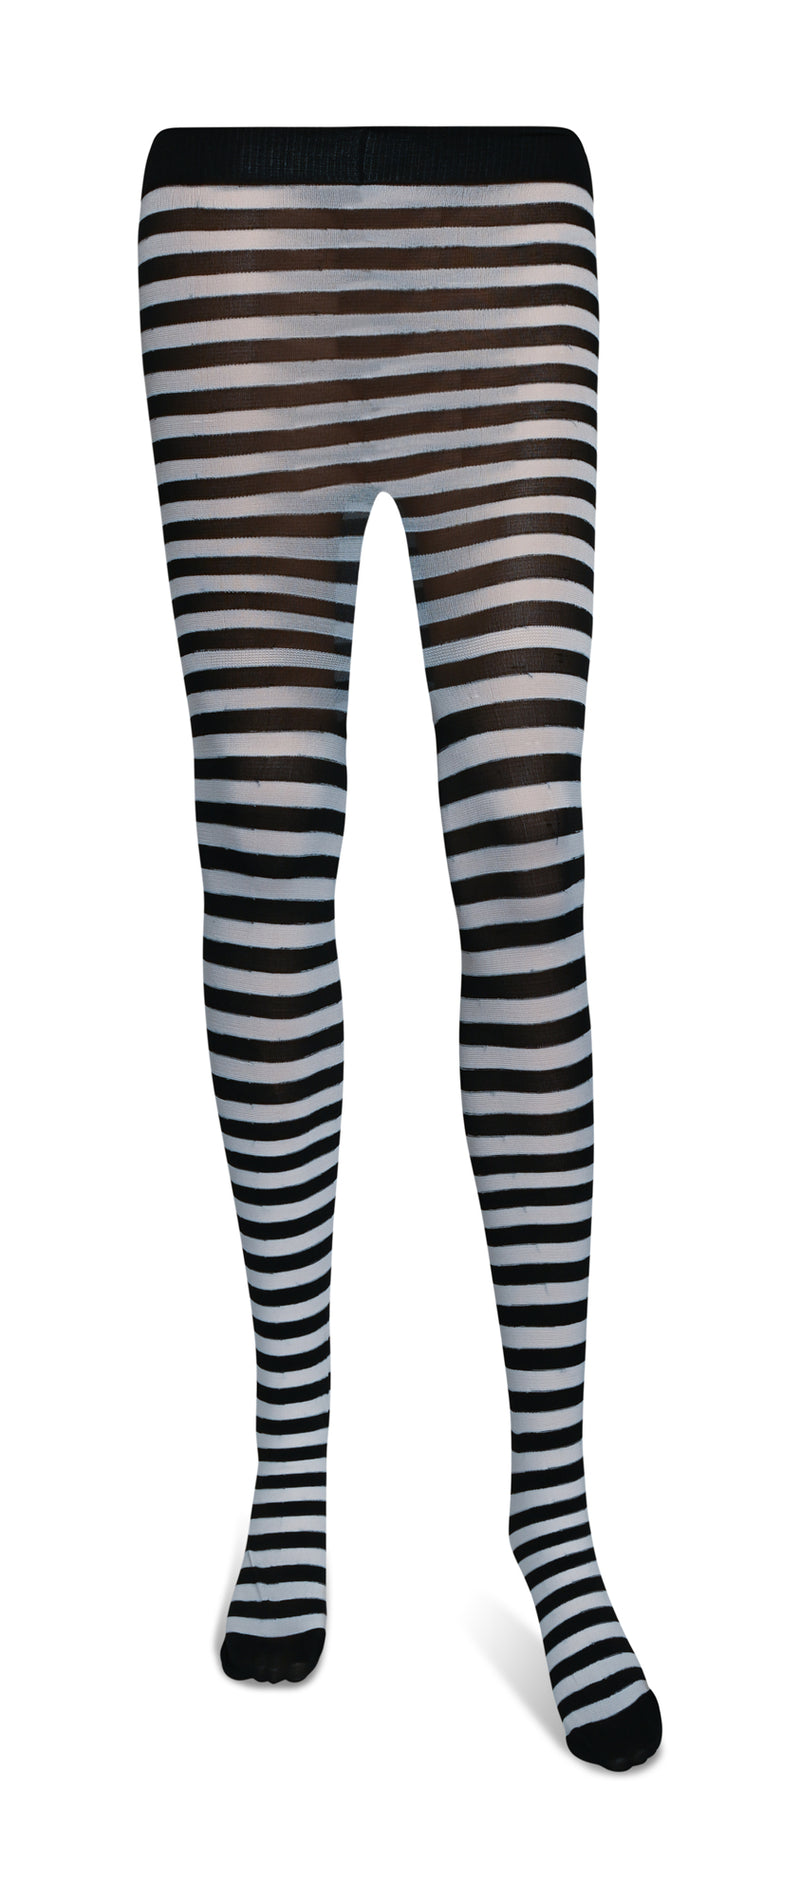 Striped Black and White Tights